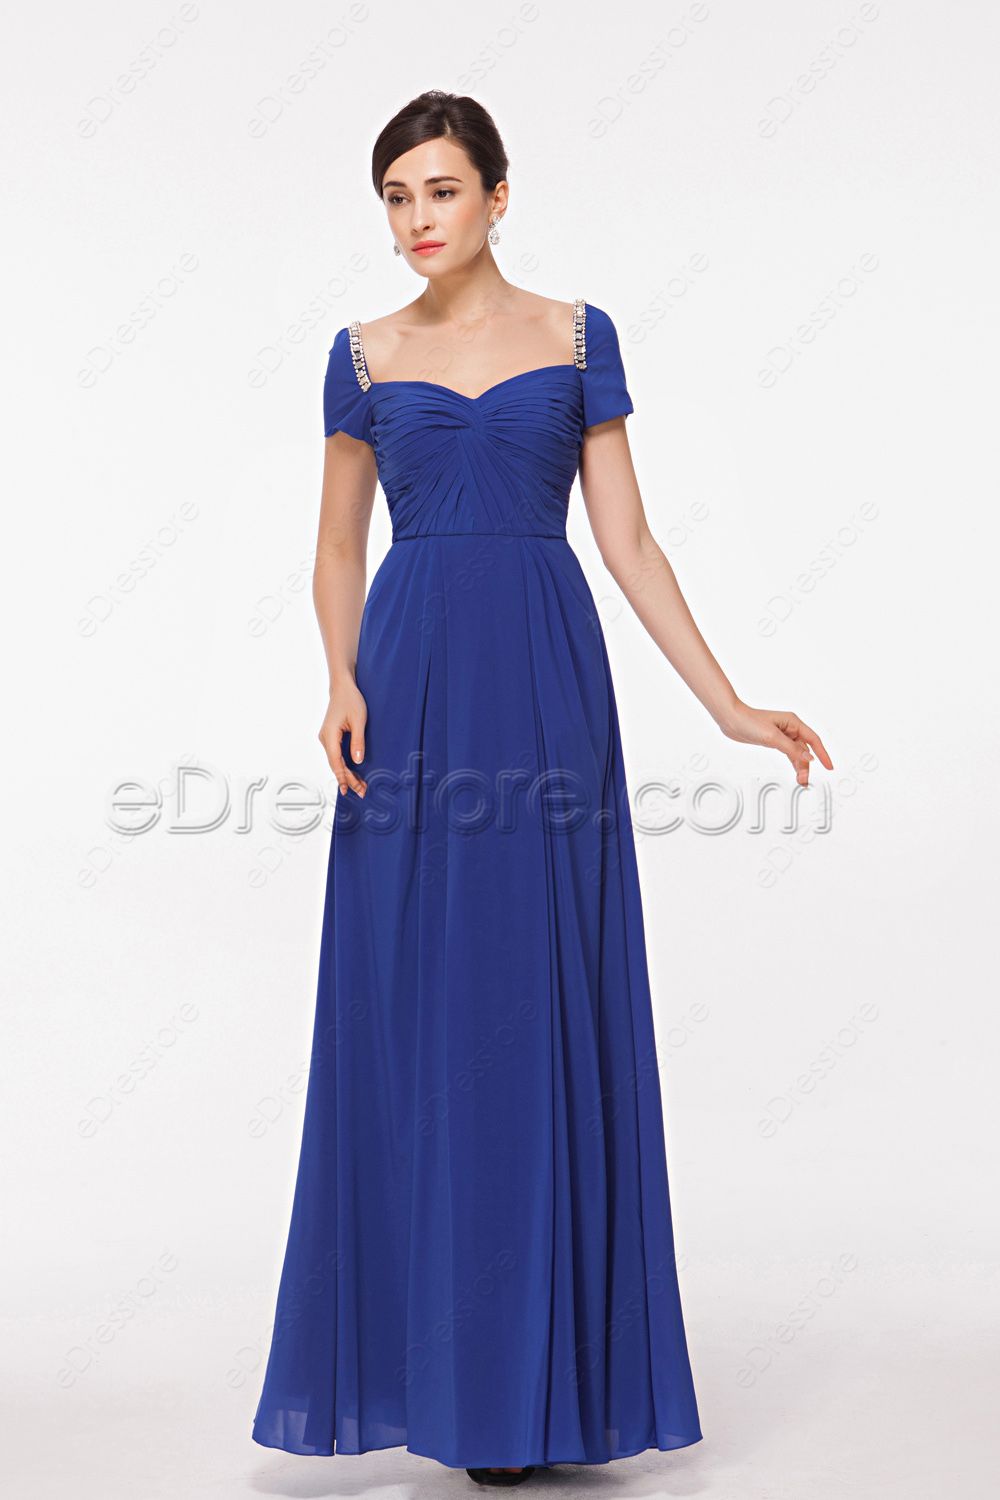 Royal Blue Mother of the Bride Dress with Sleeves | eDresstore